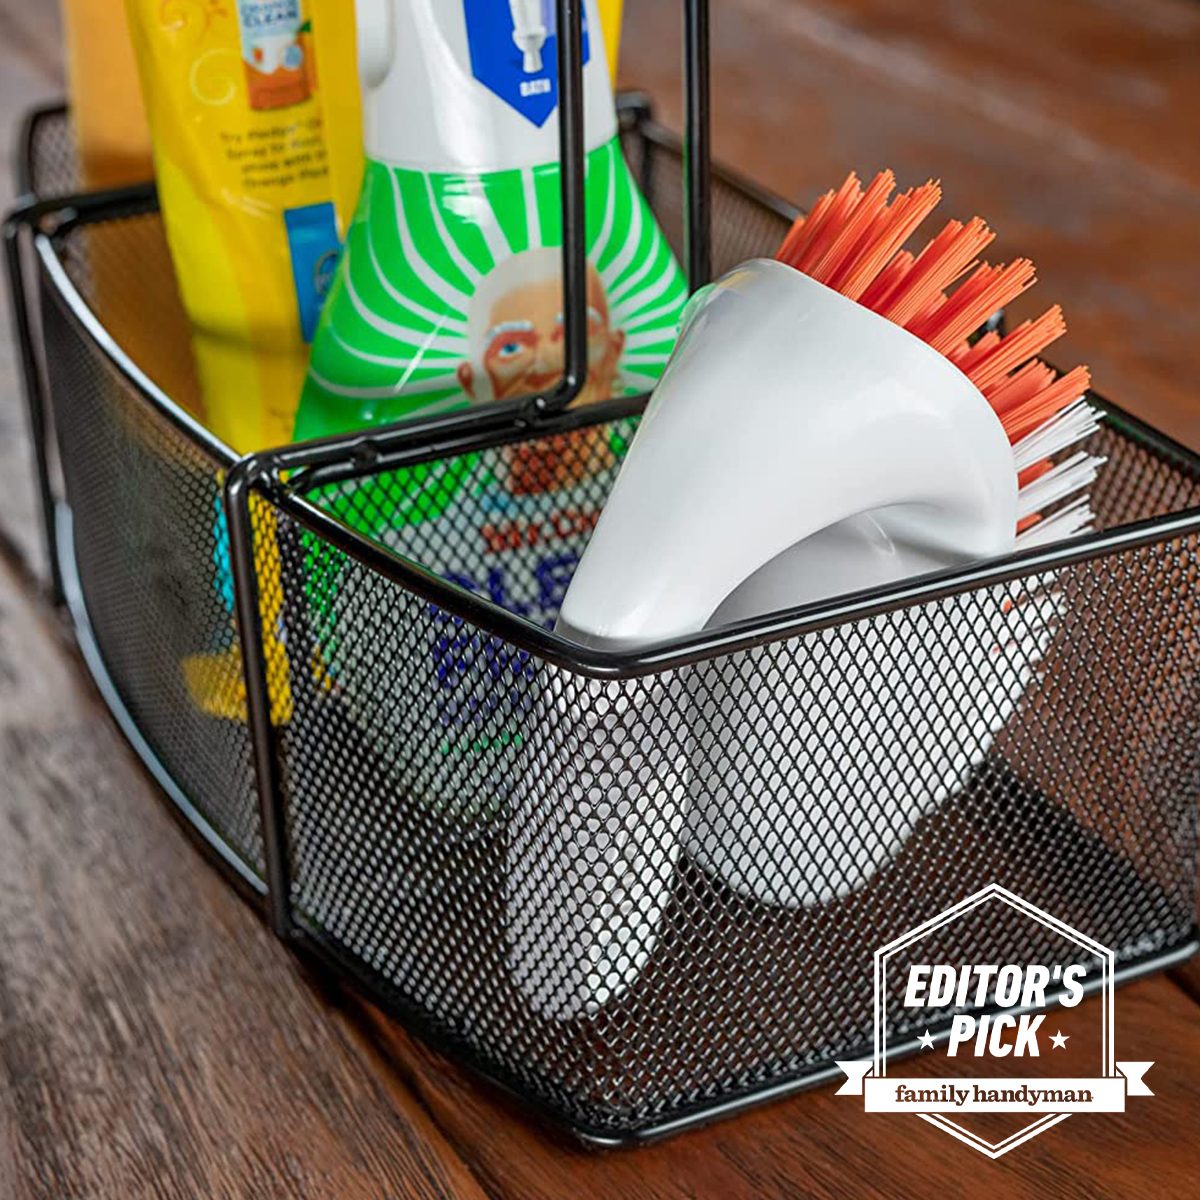 Superior Trading Co. Grill Caddy Review: Ideal for Your Next Backyard BBQ!